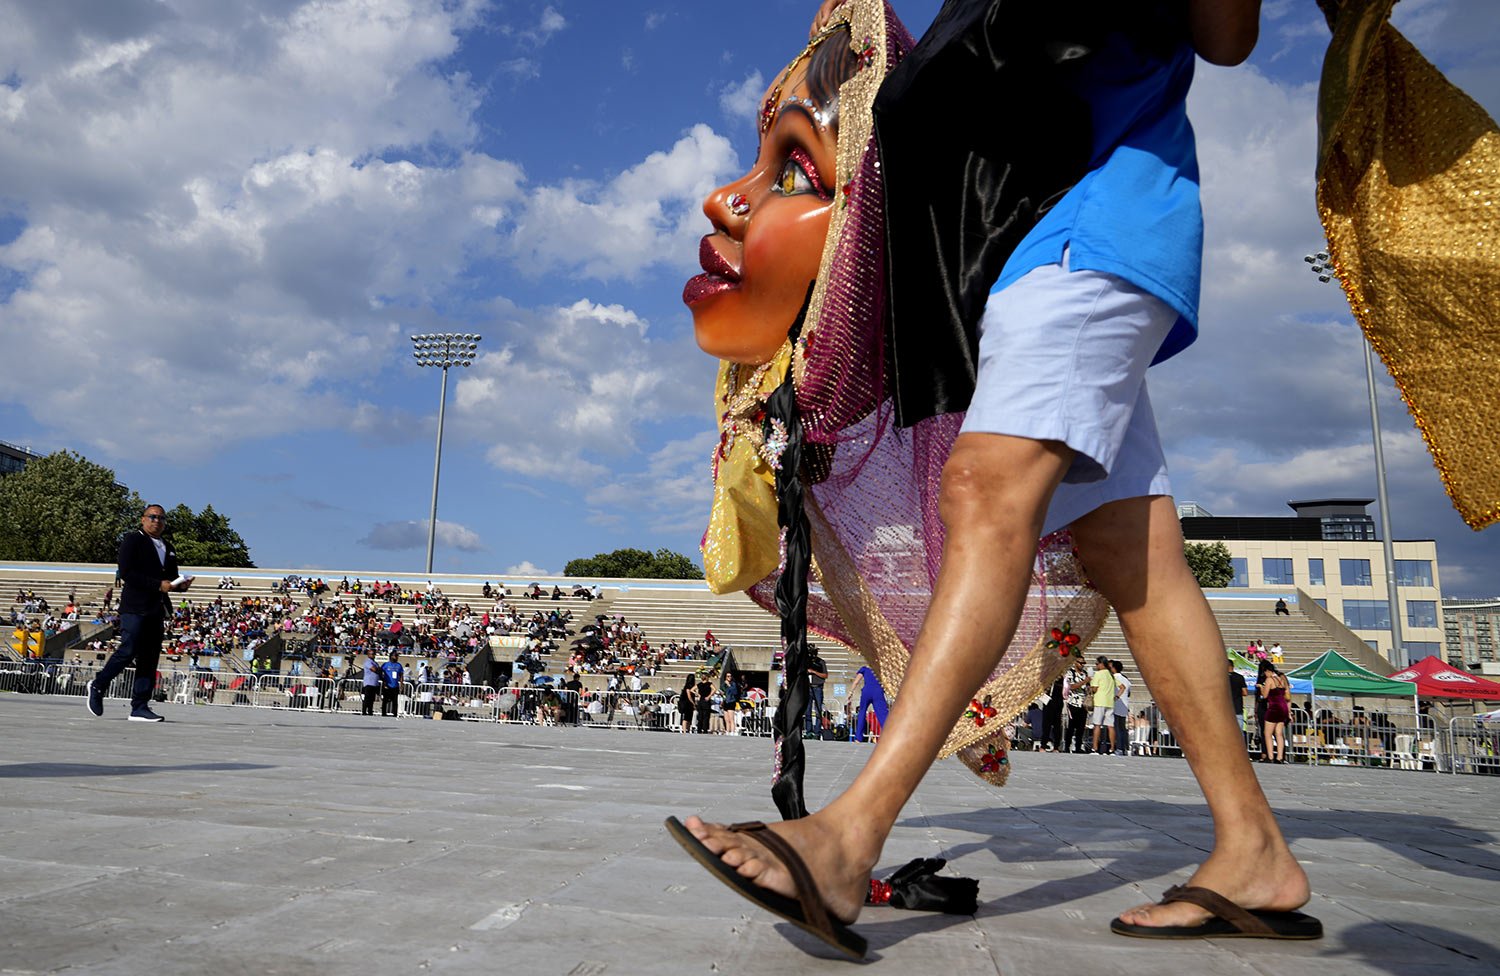  A person arrives carrying Carnival costumes in preparation for the King and Queen Showcase at Lamport Stadium in Toronto, Canada, Thursday, July 28, 2022. (AP Photo/Kamran Jebreili) 